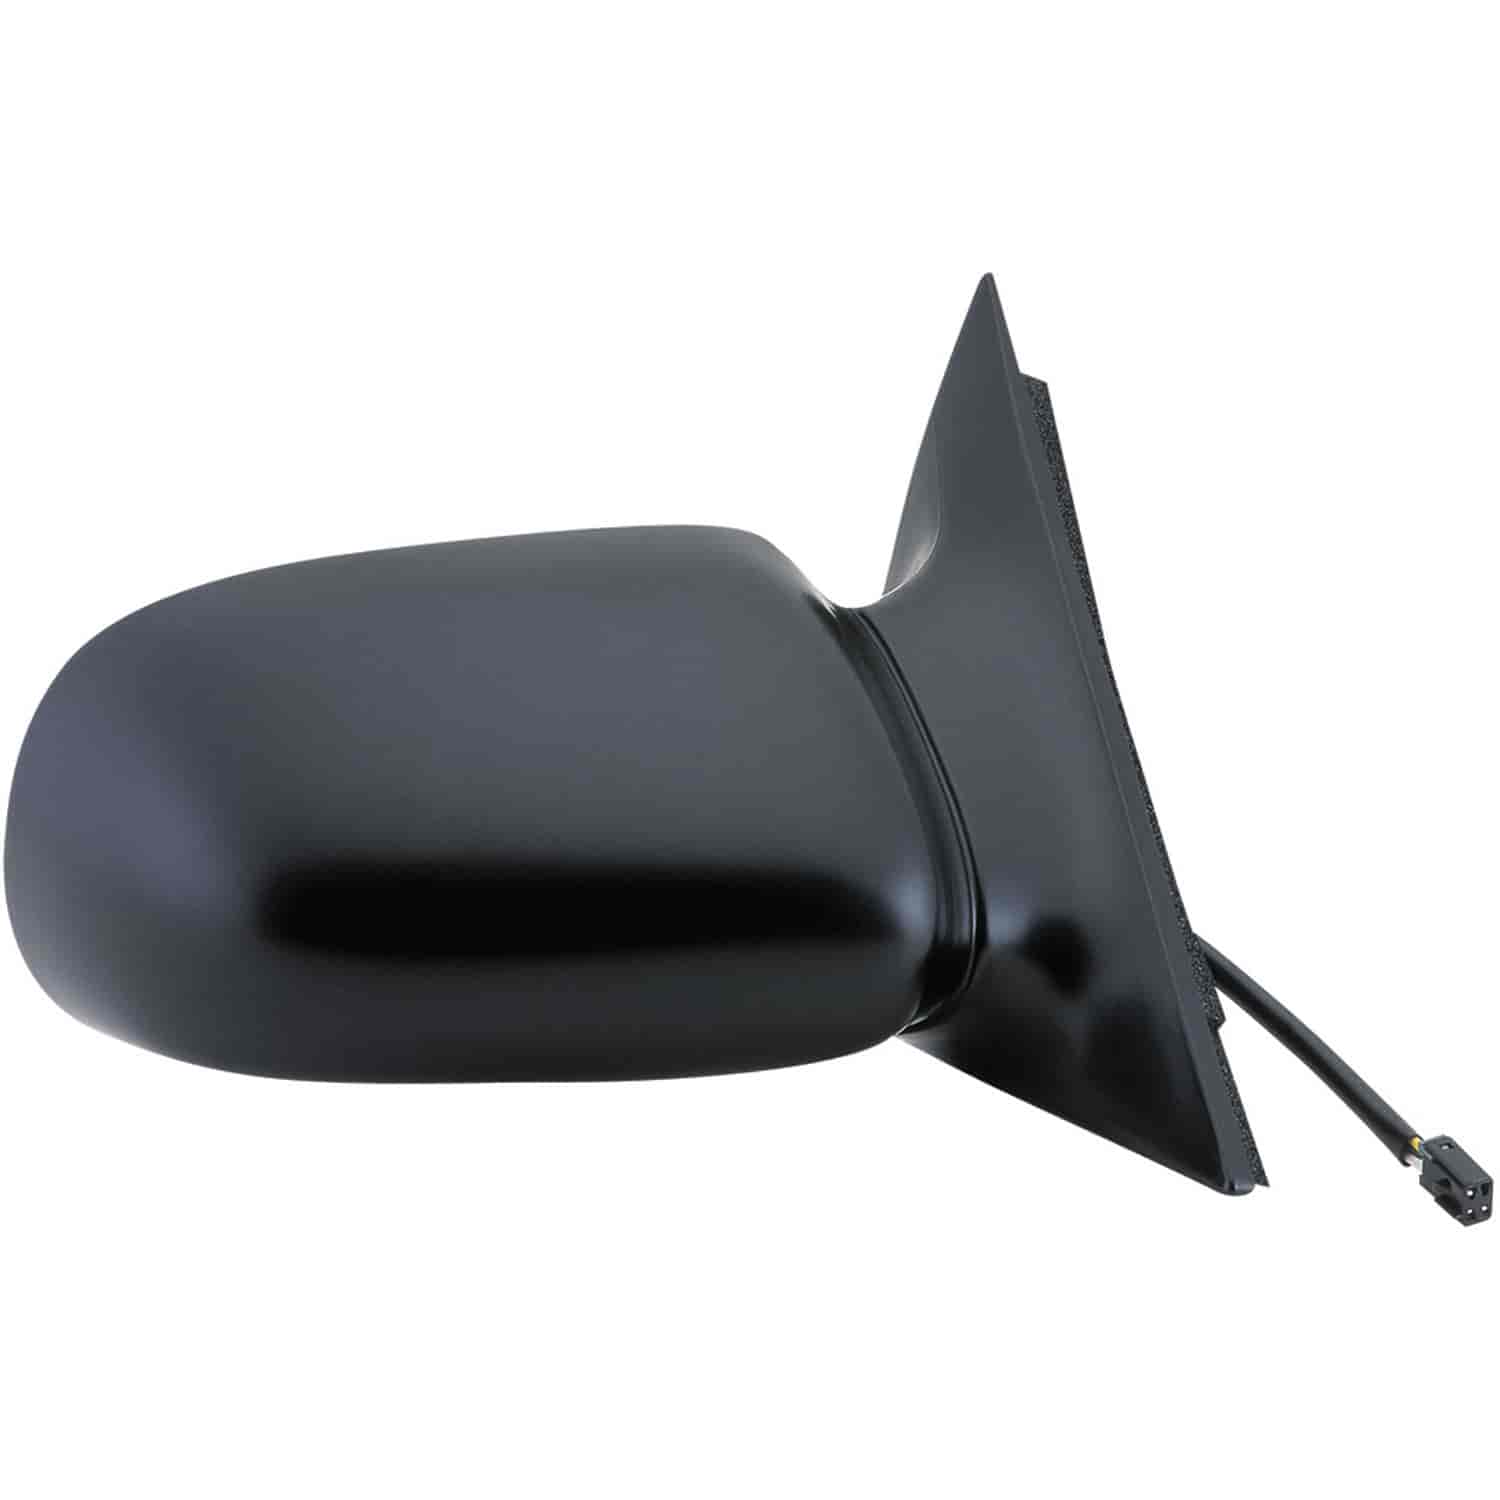 OEM Style Replacement mirror for 92-98 Olds. Achivea passenger side mirror tested to fit and functio